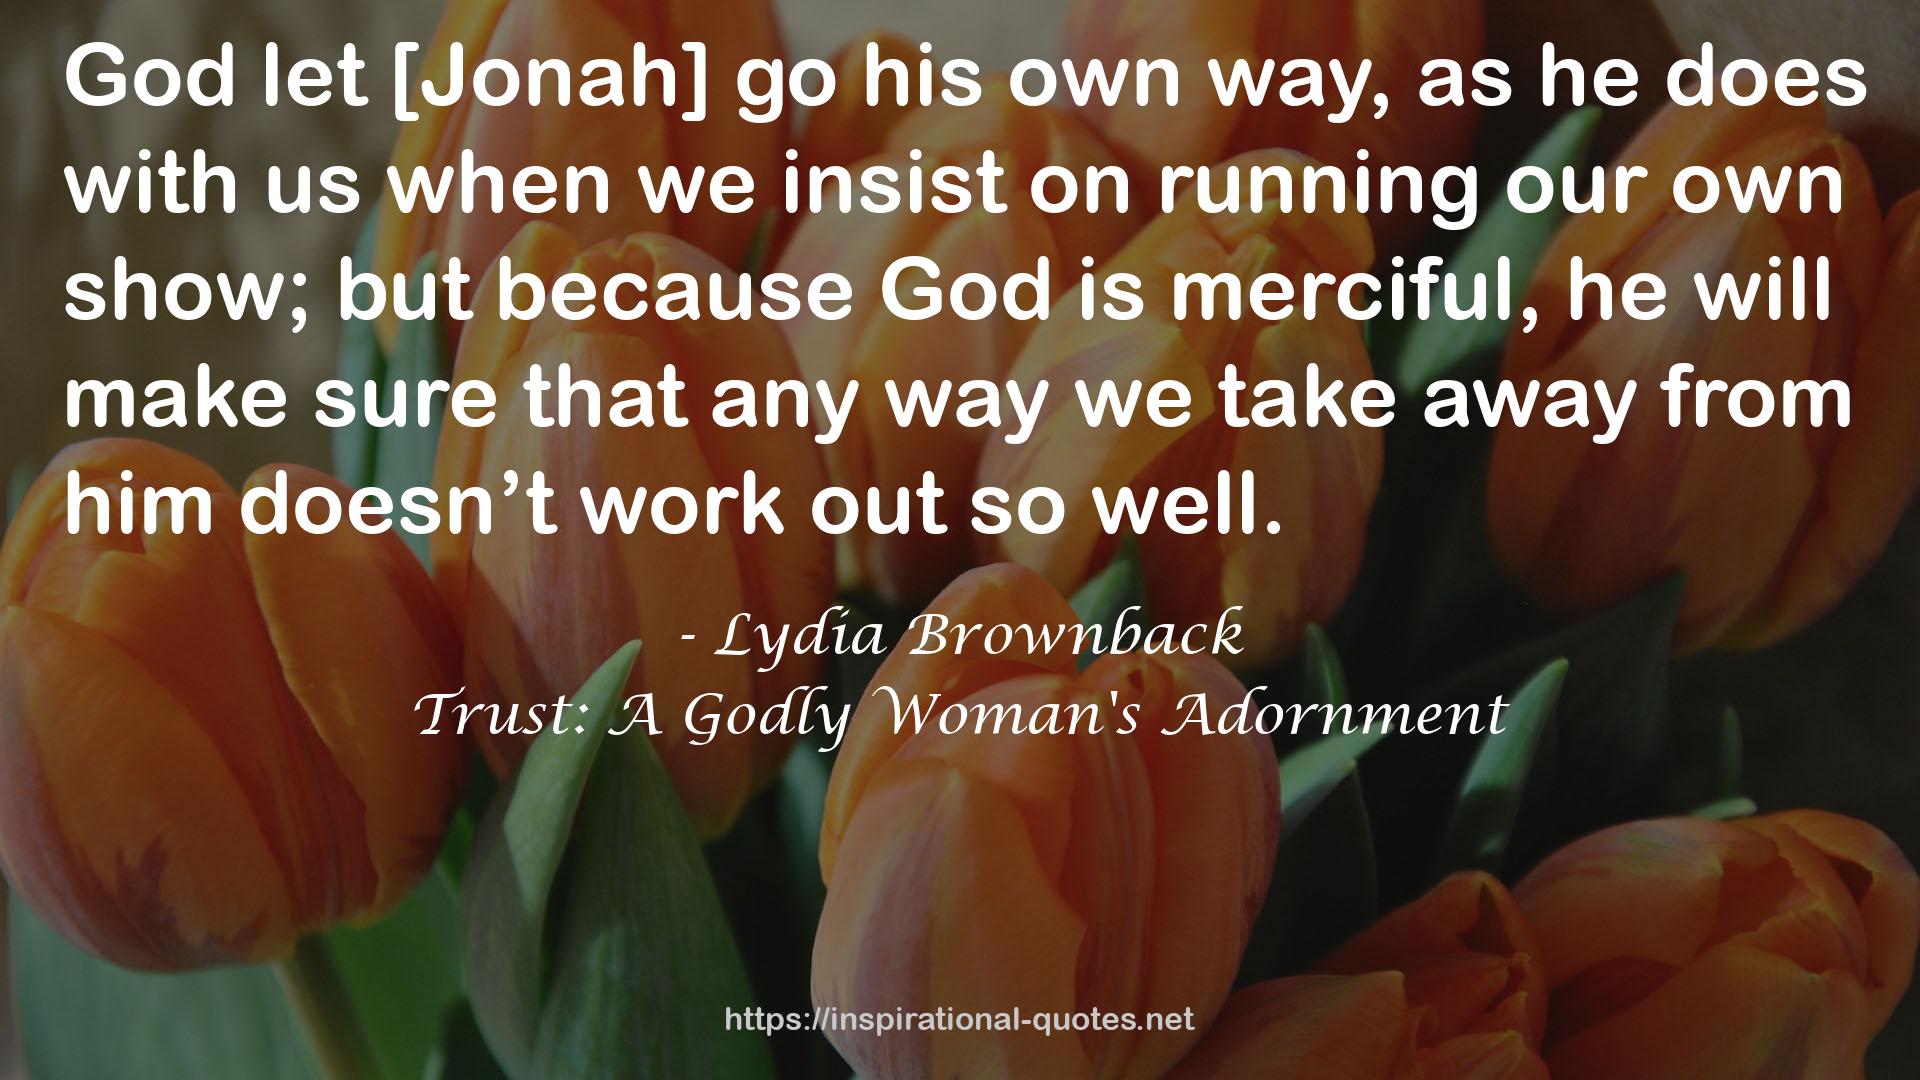 Trust: A Godly Woman's Adornment QUOTES